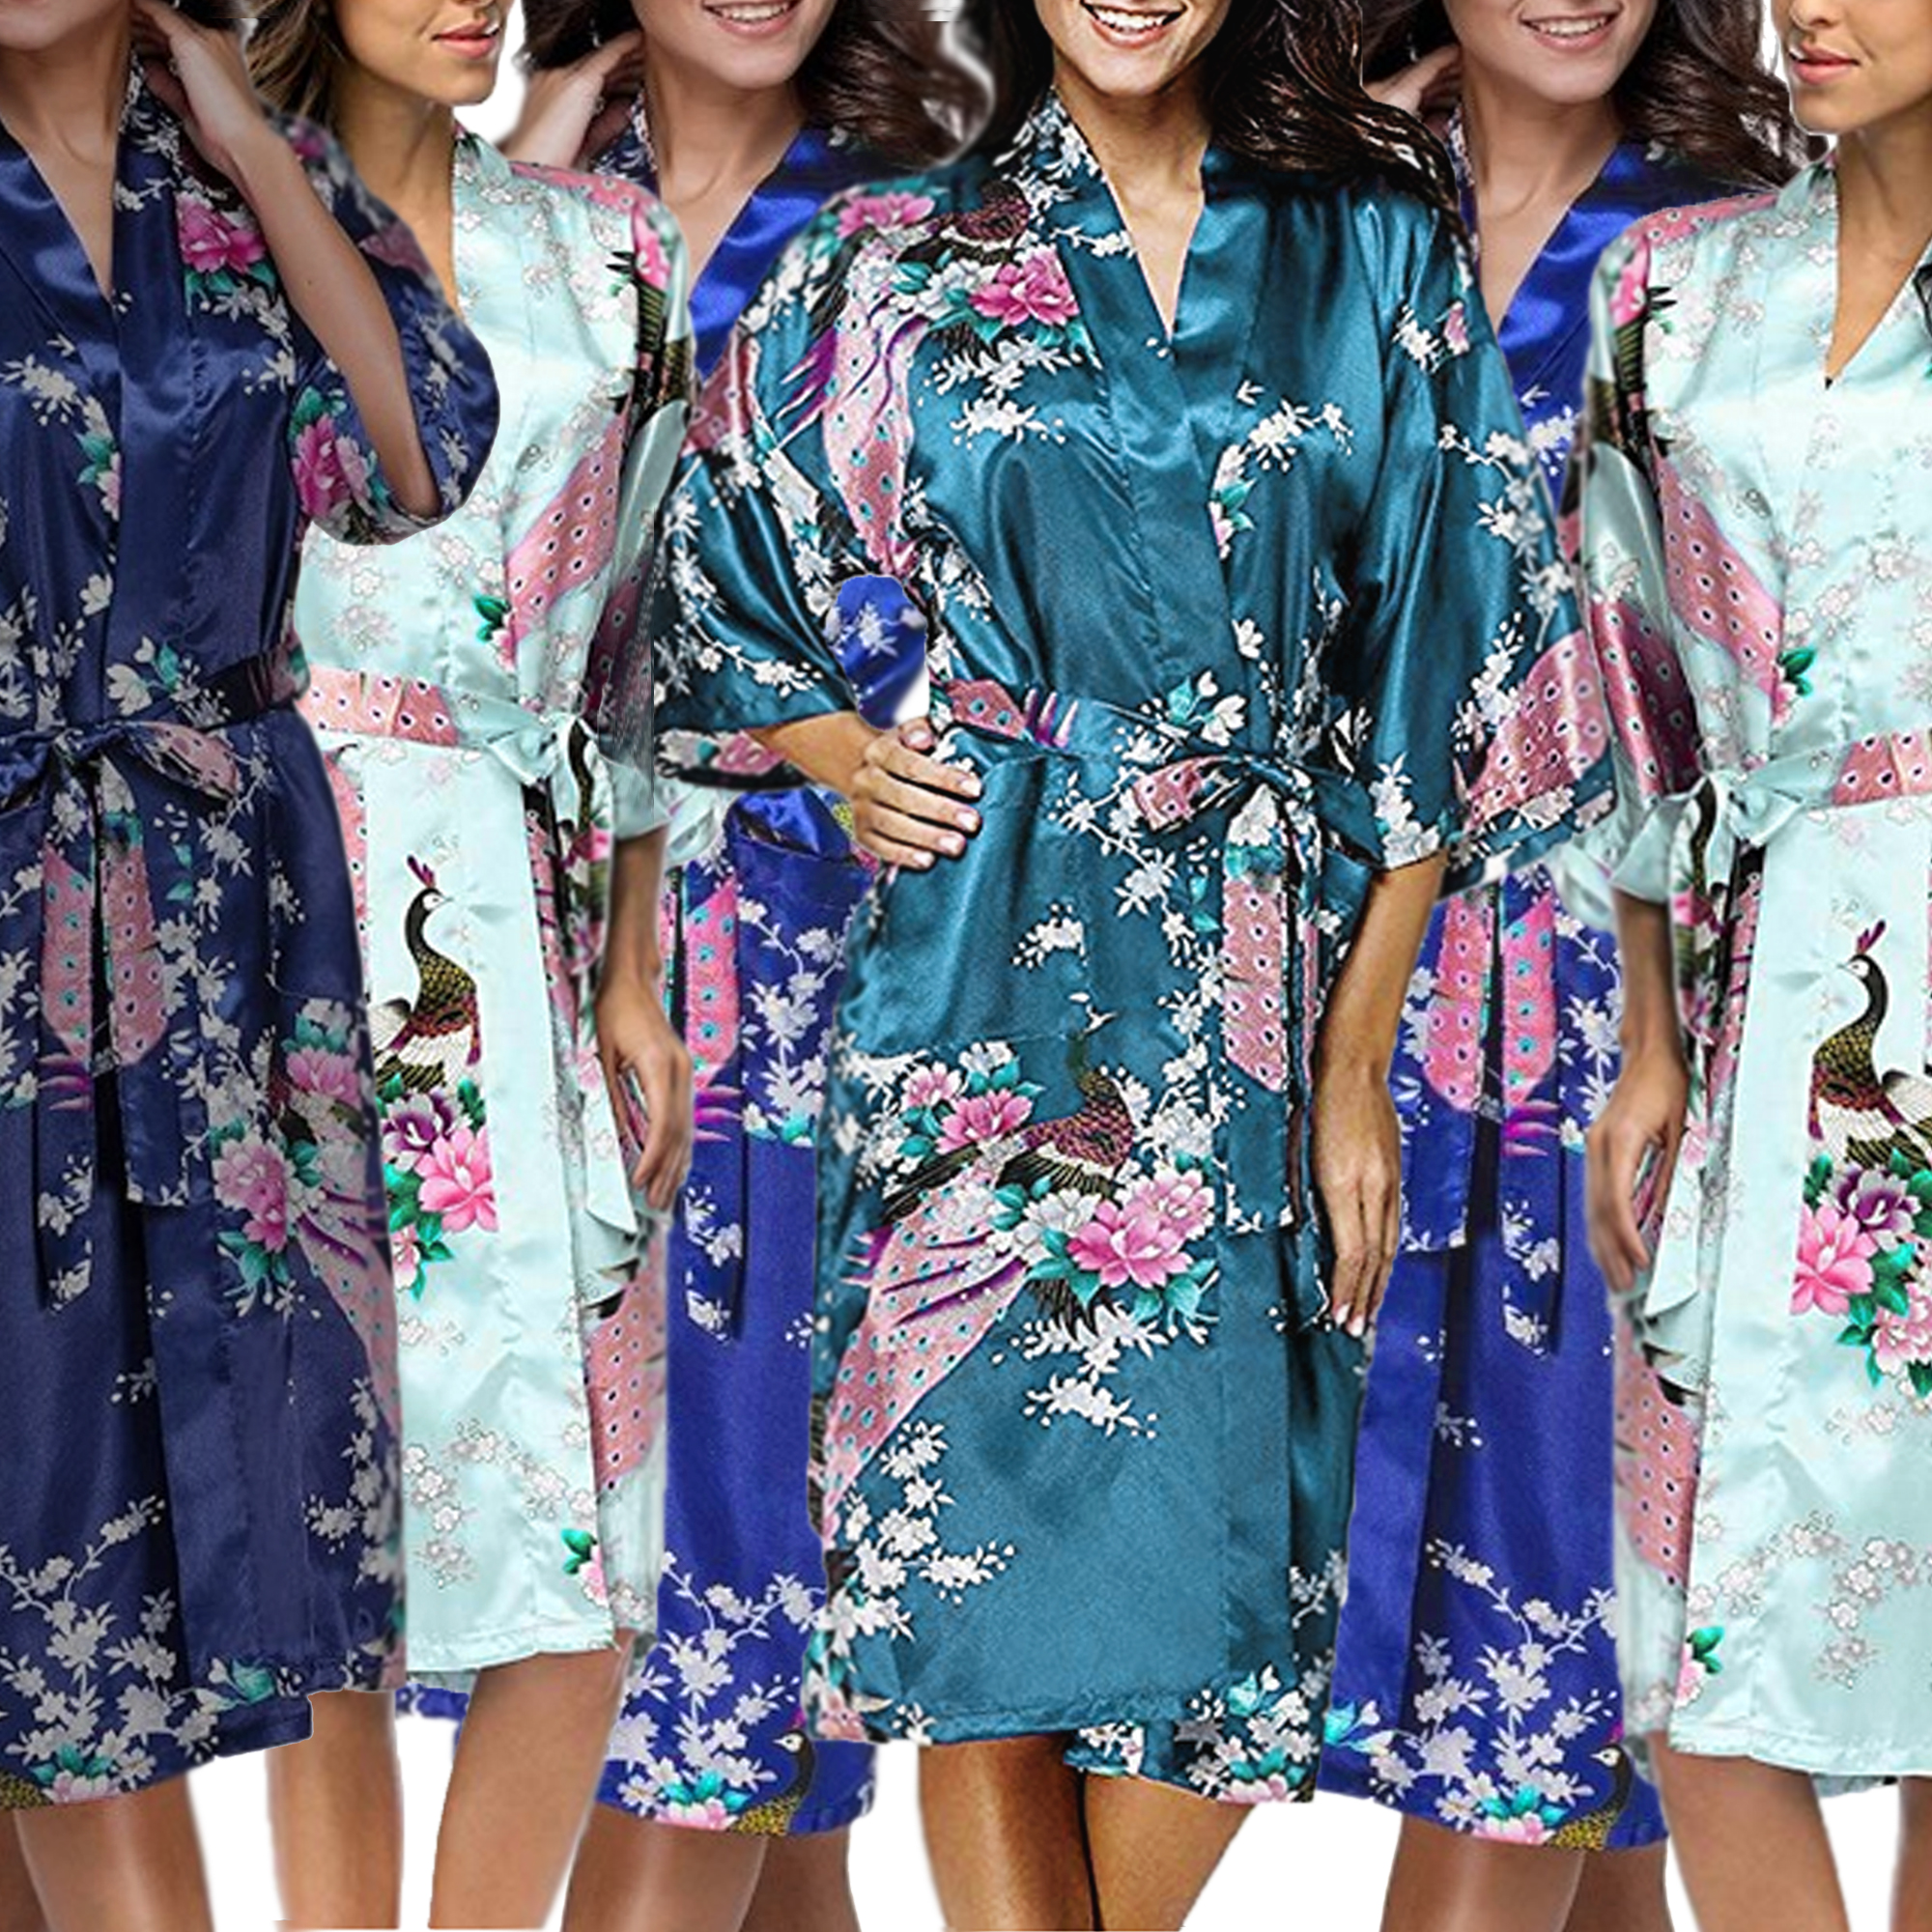 Gifts Are Blue Floral Bridal Party Bride & Bridesmaid Robes Sets, Sizes 2-18, Set of 12